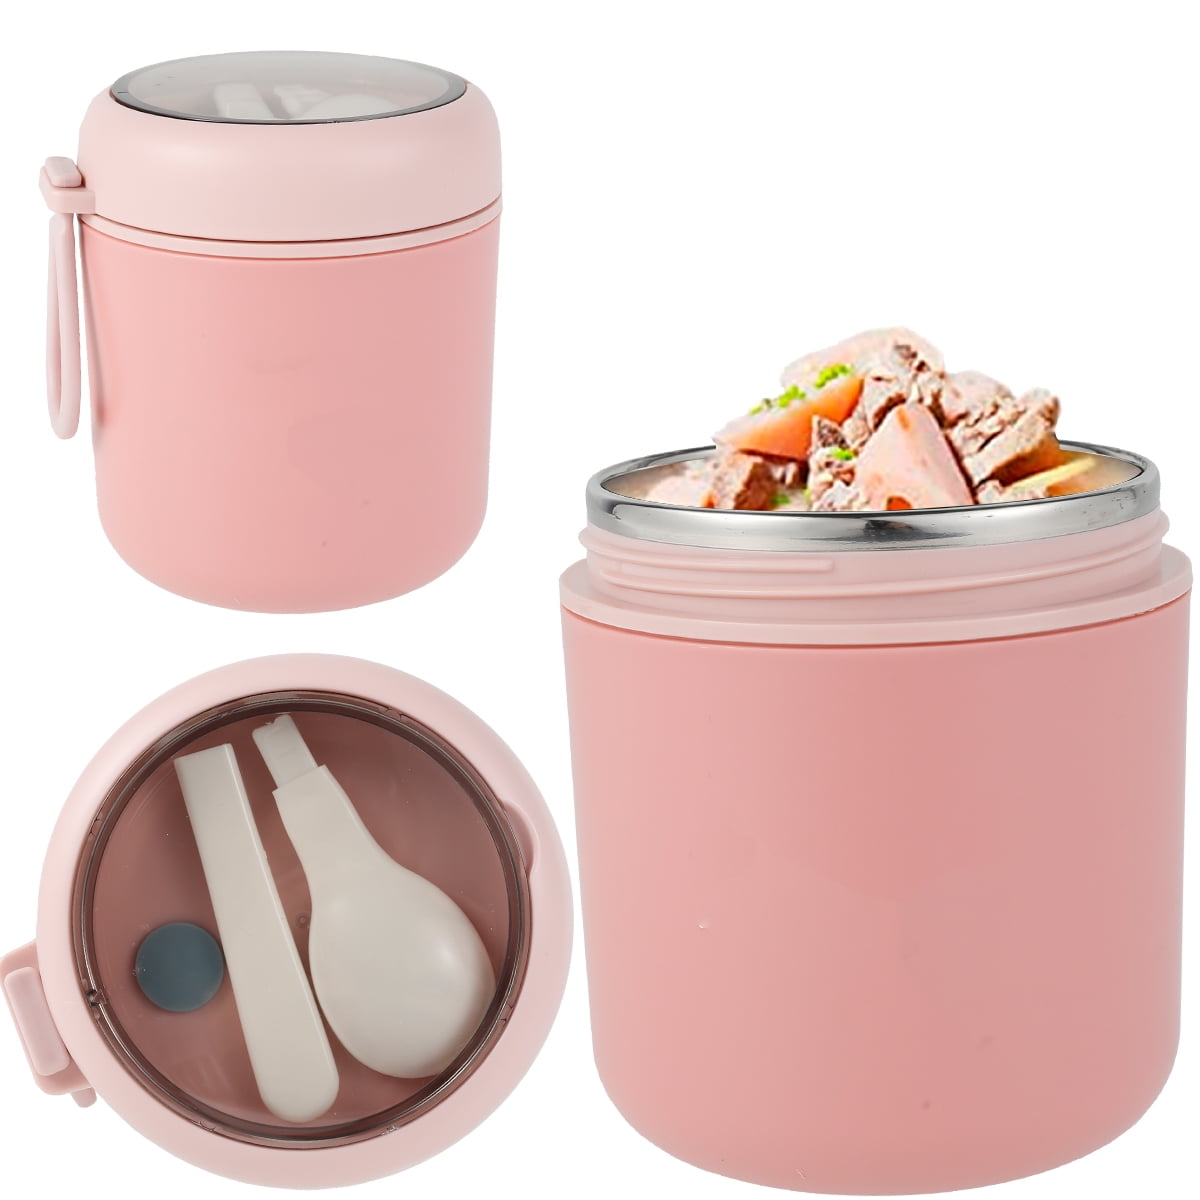 Duety Insulated Food Container, Lunch Box with Stainless Steel